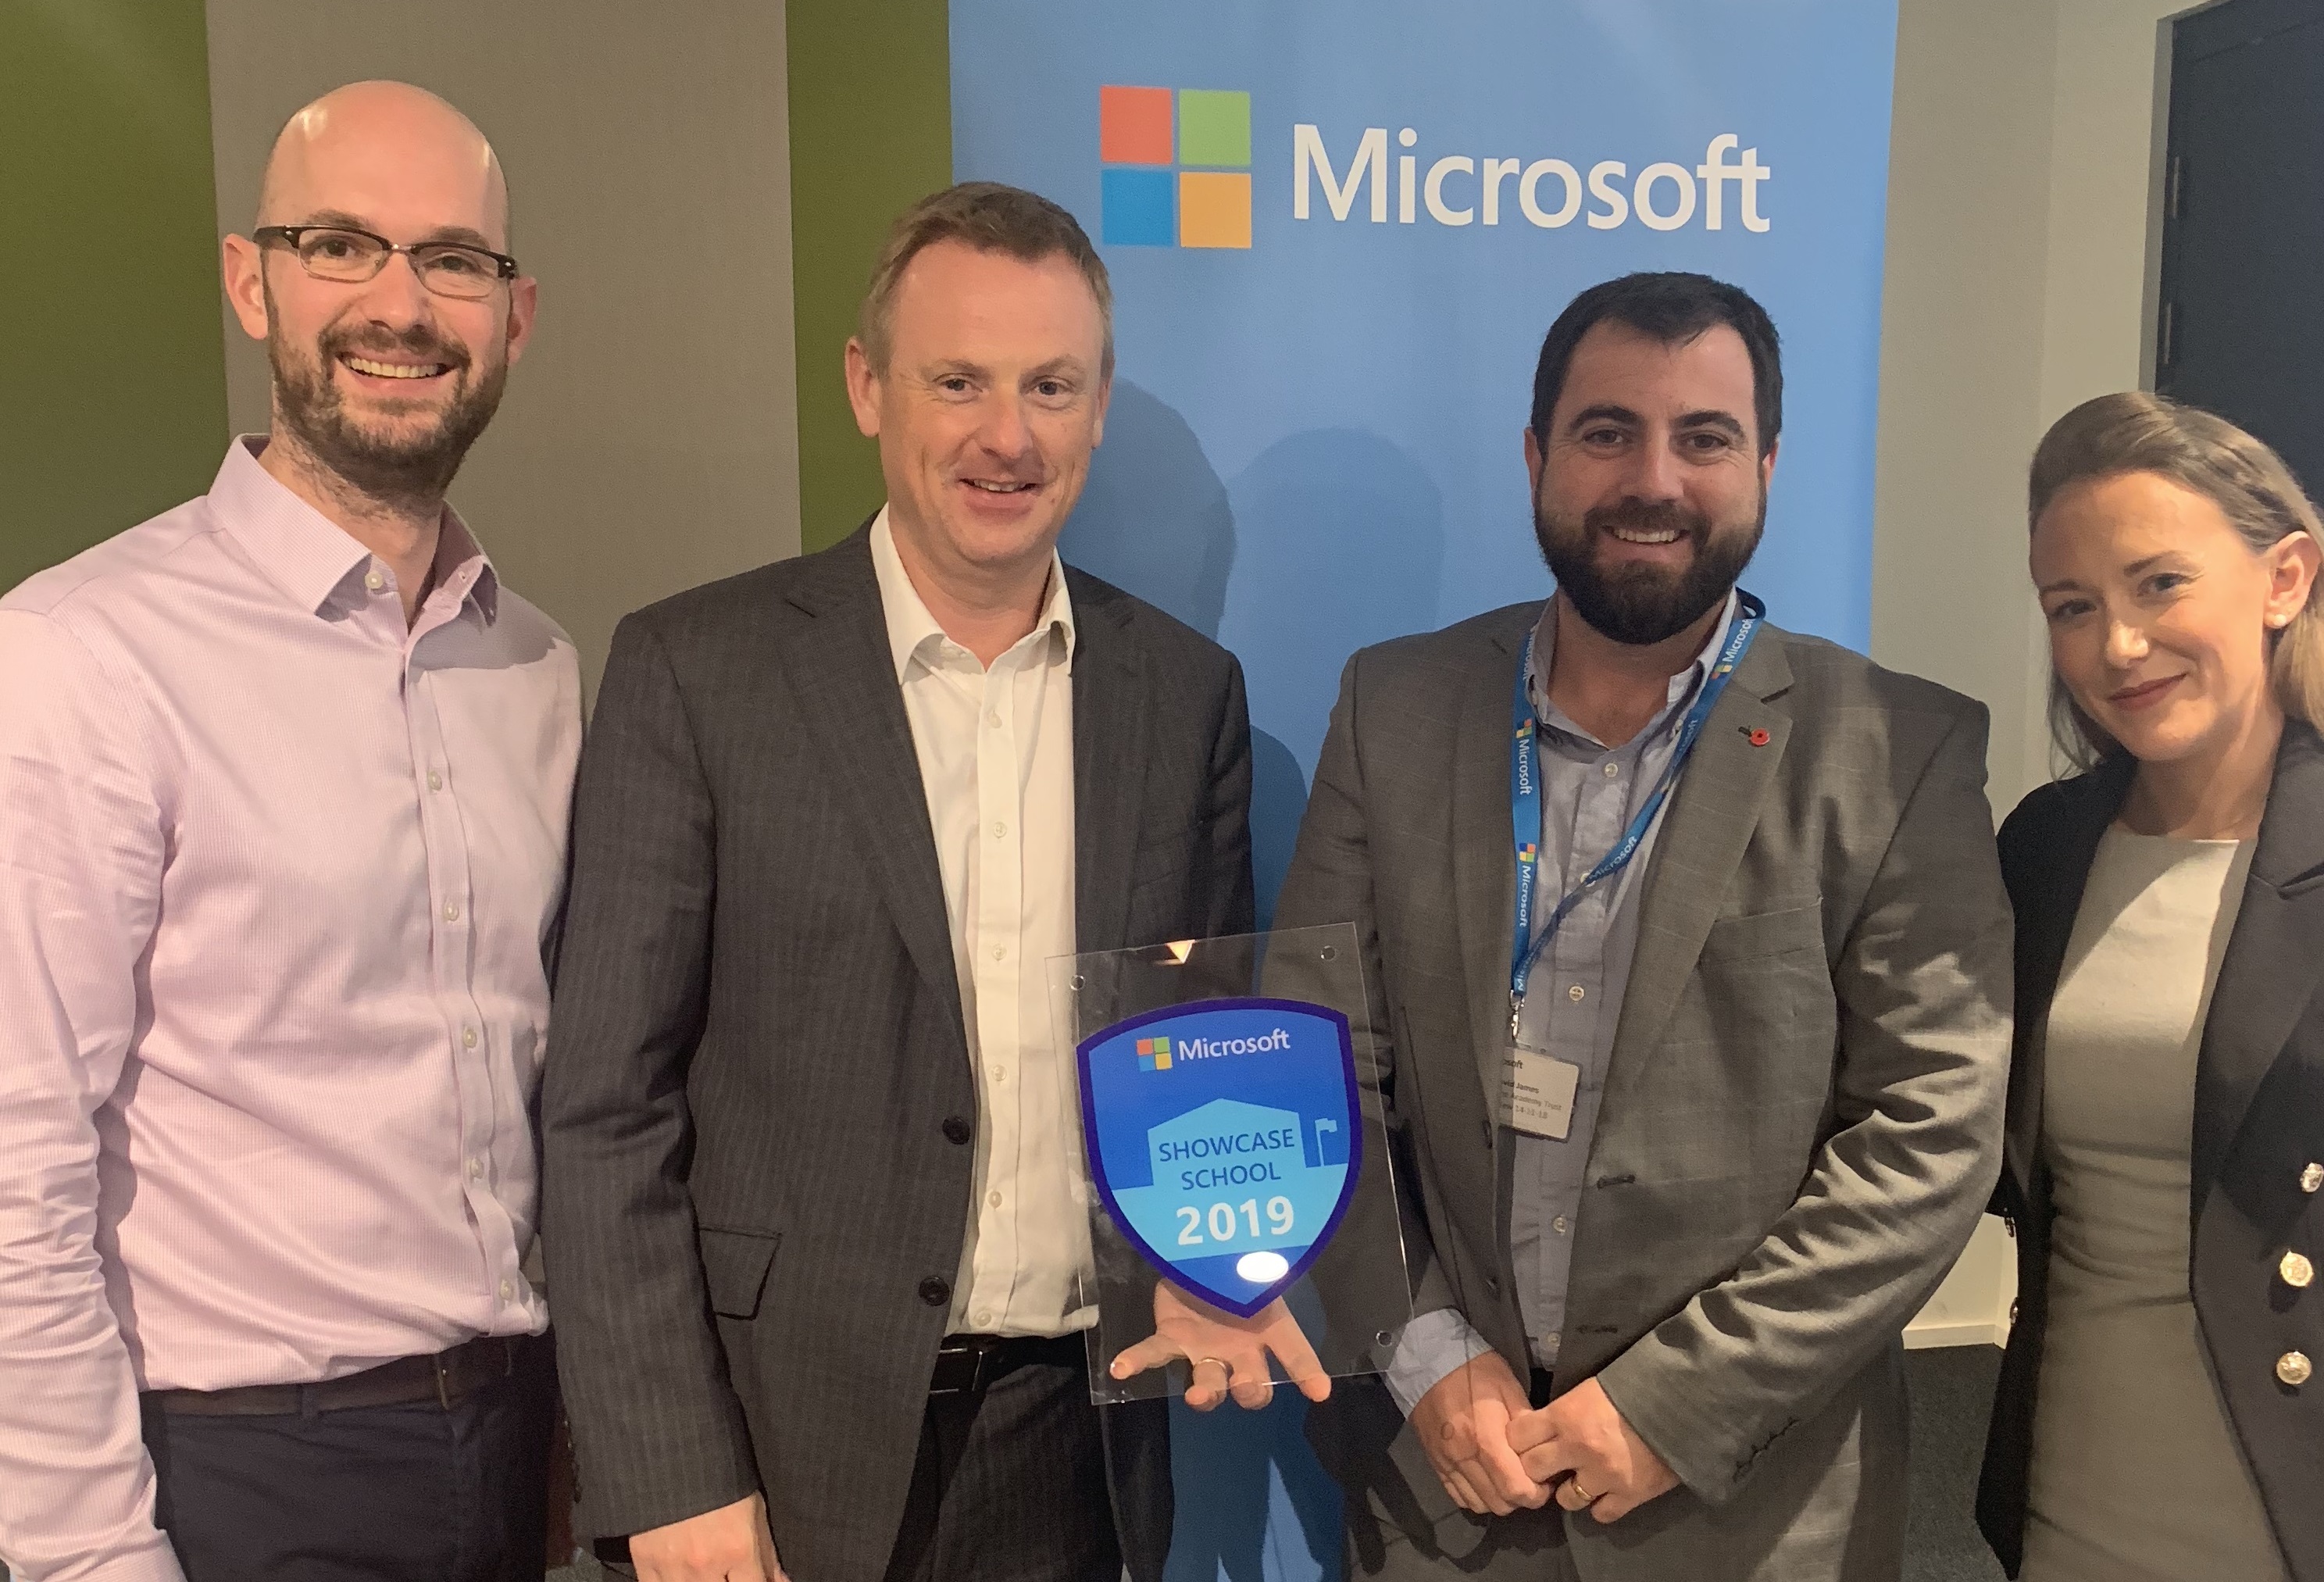 Chris Rothwell (far left) with Jonathan Bishop, Headteacher of Broadclyst Primary School; David James, Deputy Chief Executive of Broadclyst; and Tina Jones, UK Education Manager at Microsoft